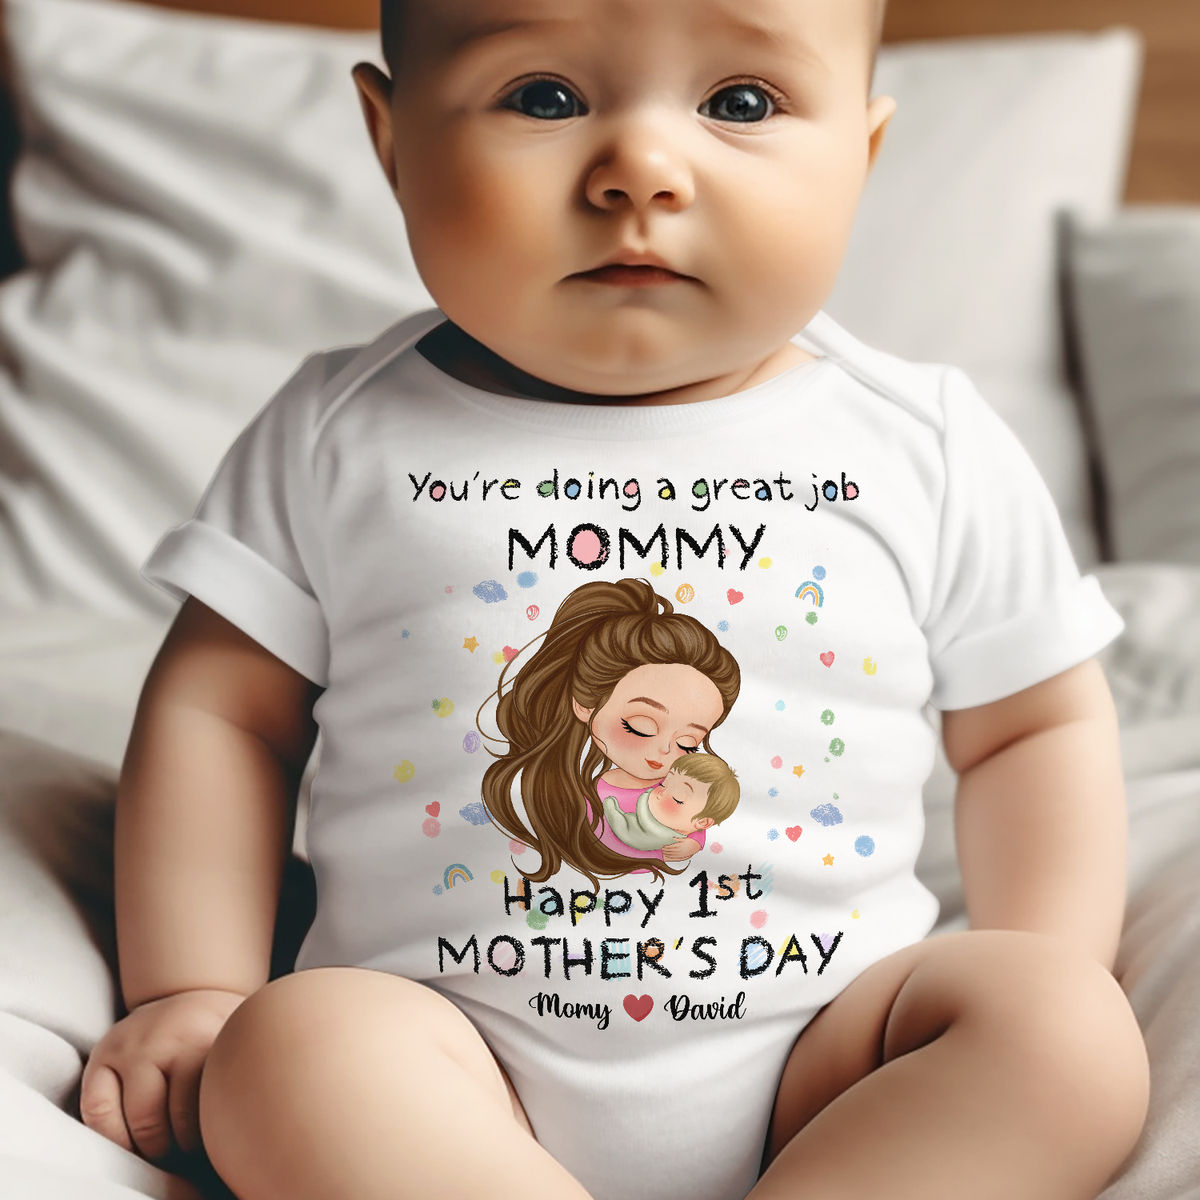 Personalized Shirt - Custom Baby Onesies - You're doing a great job mommy - Happy 1st Mother's Day (27898)